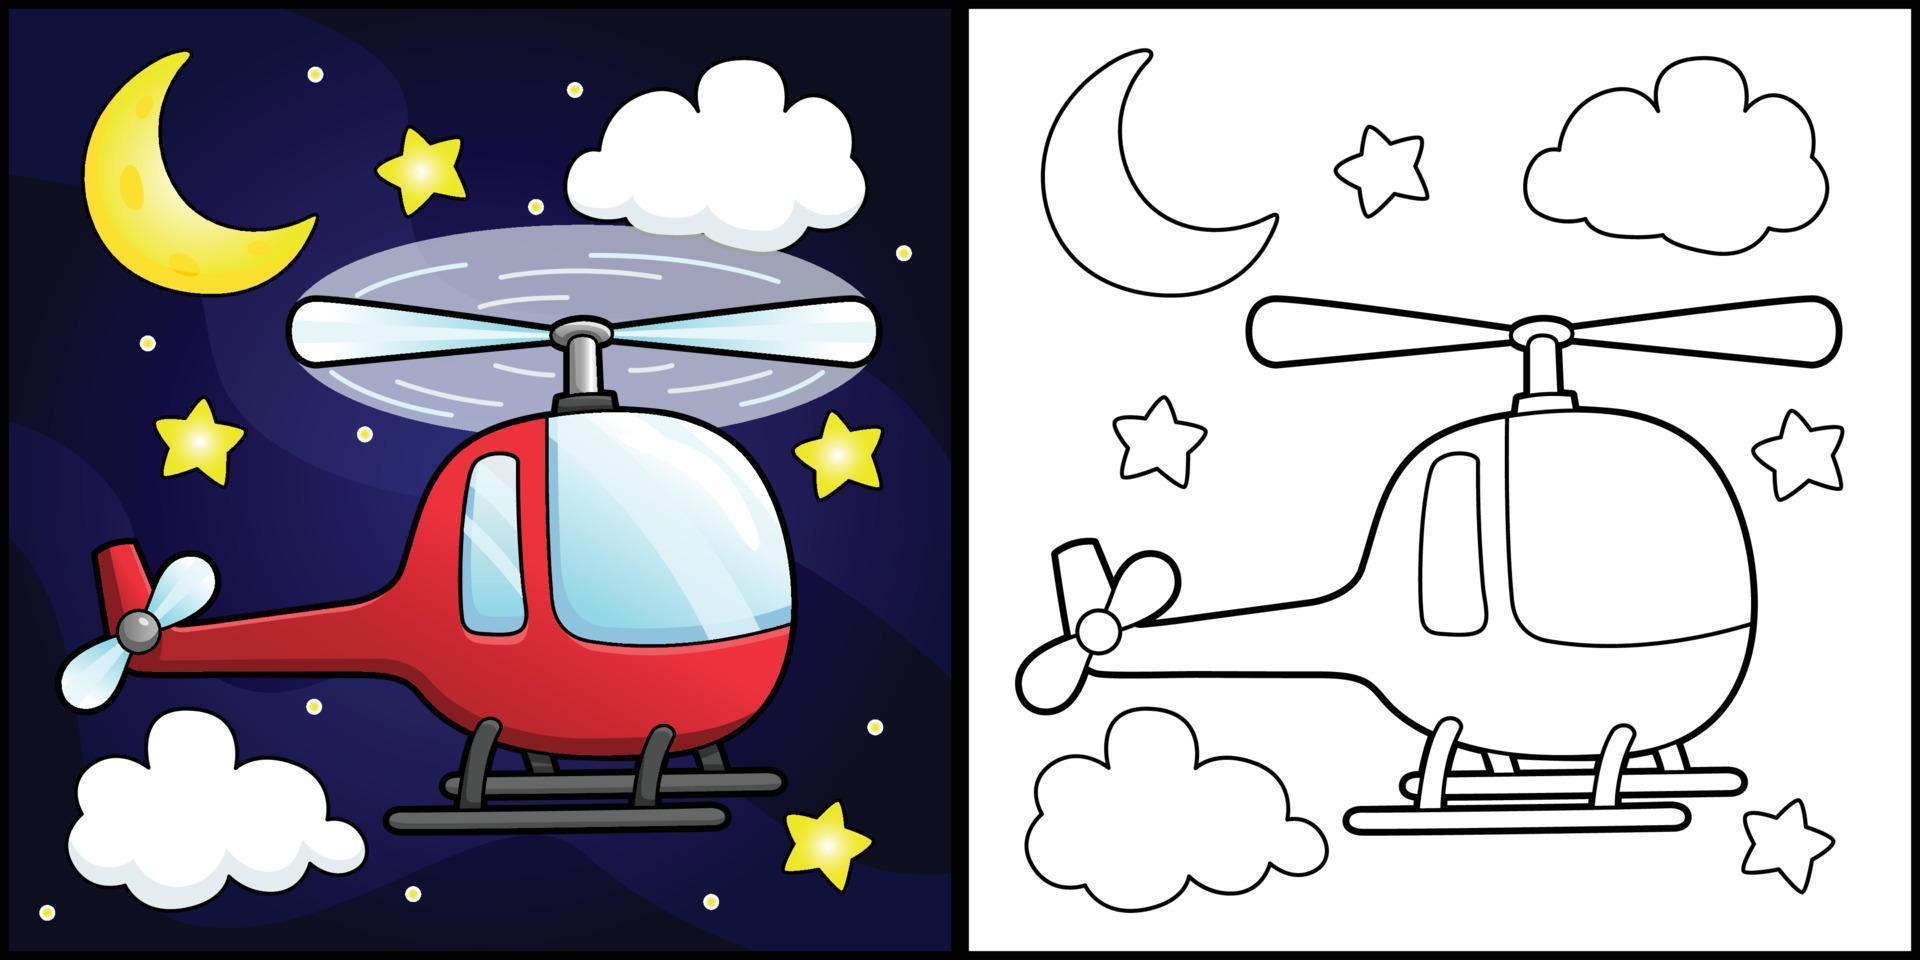 Helicopter Coloring Page Vehicle Illustration vector